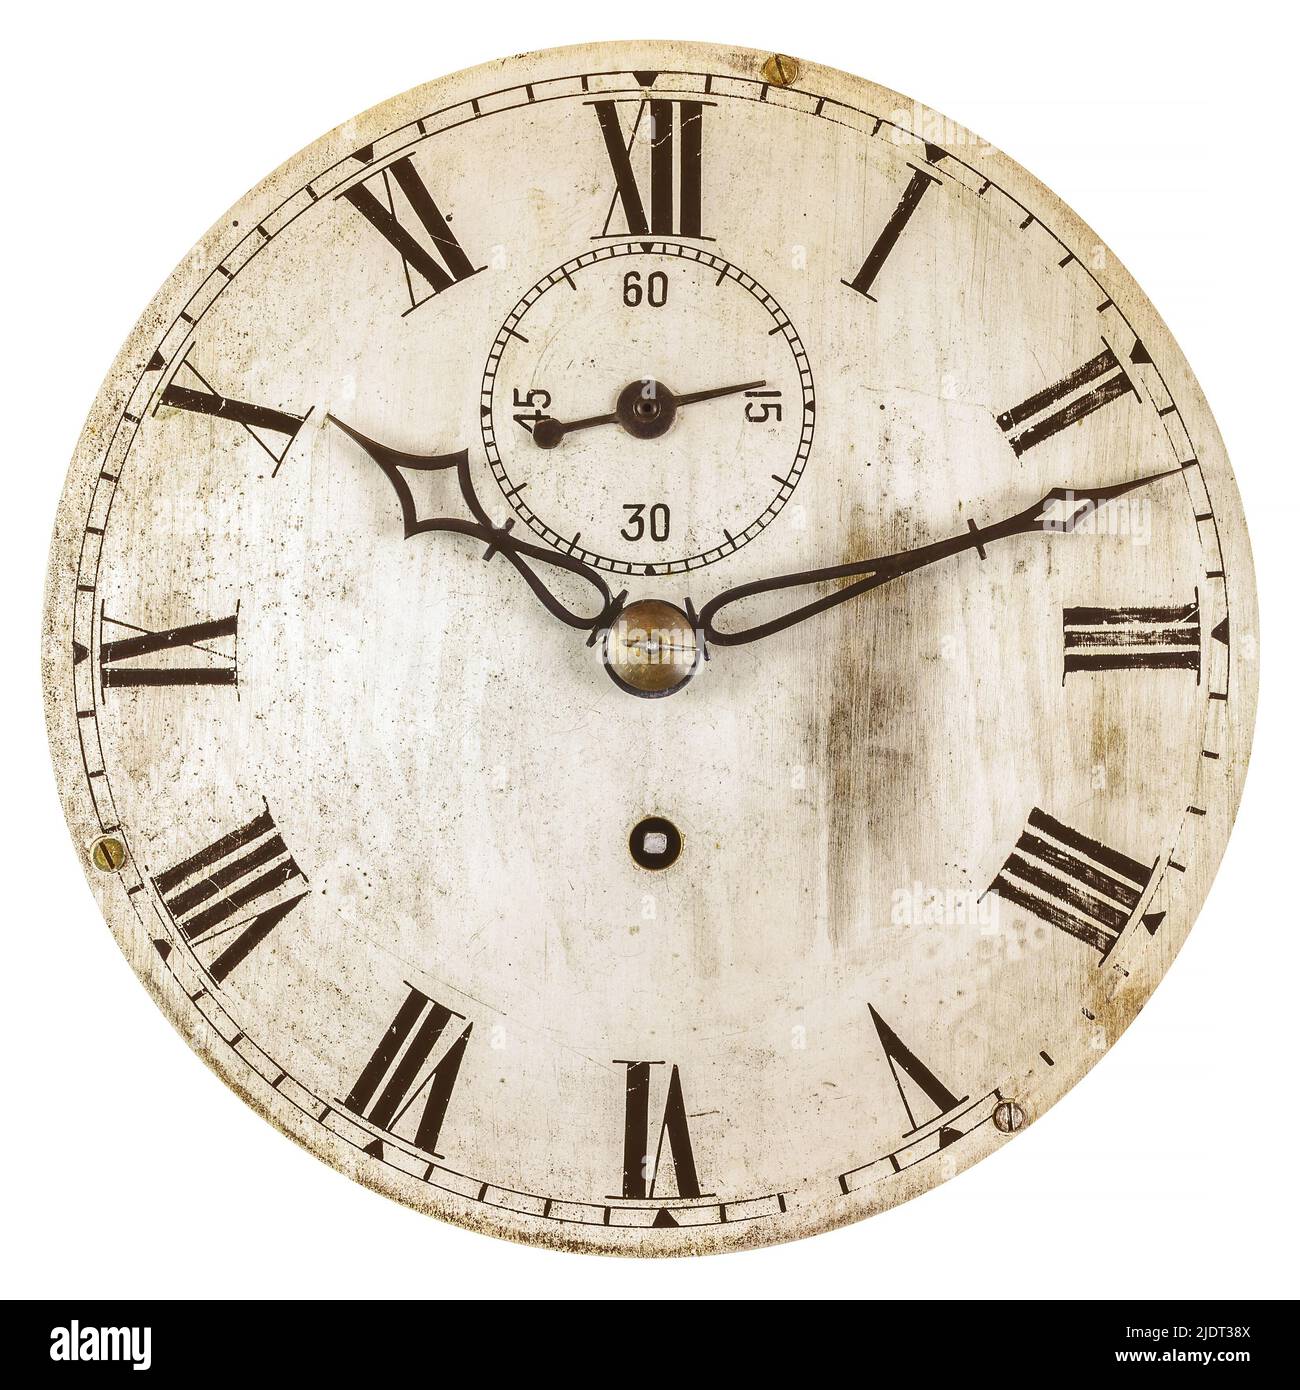 Sepia toned image of an old clock face isolated on a white background Stock Photo